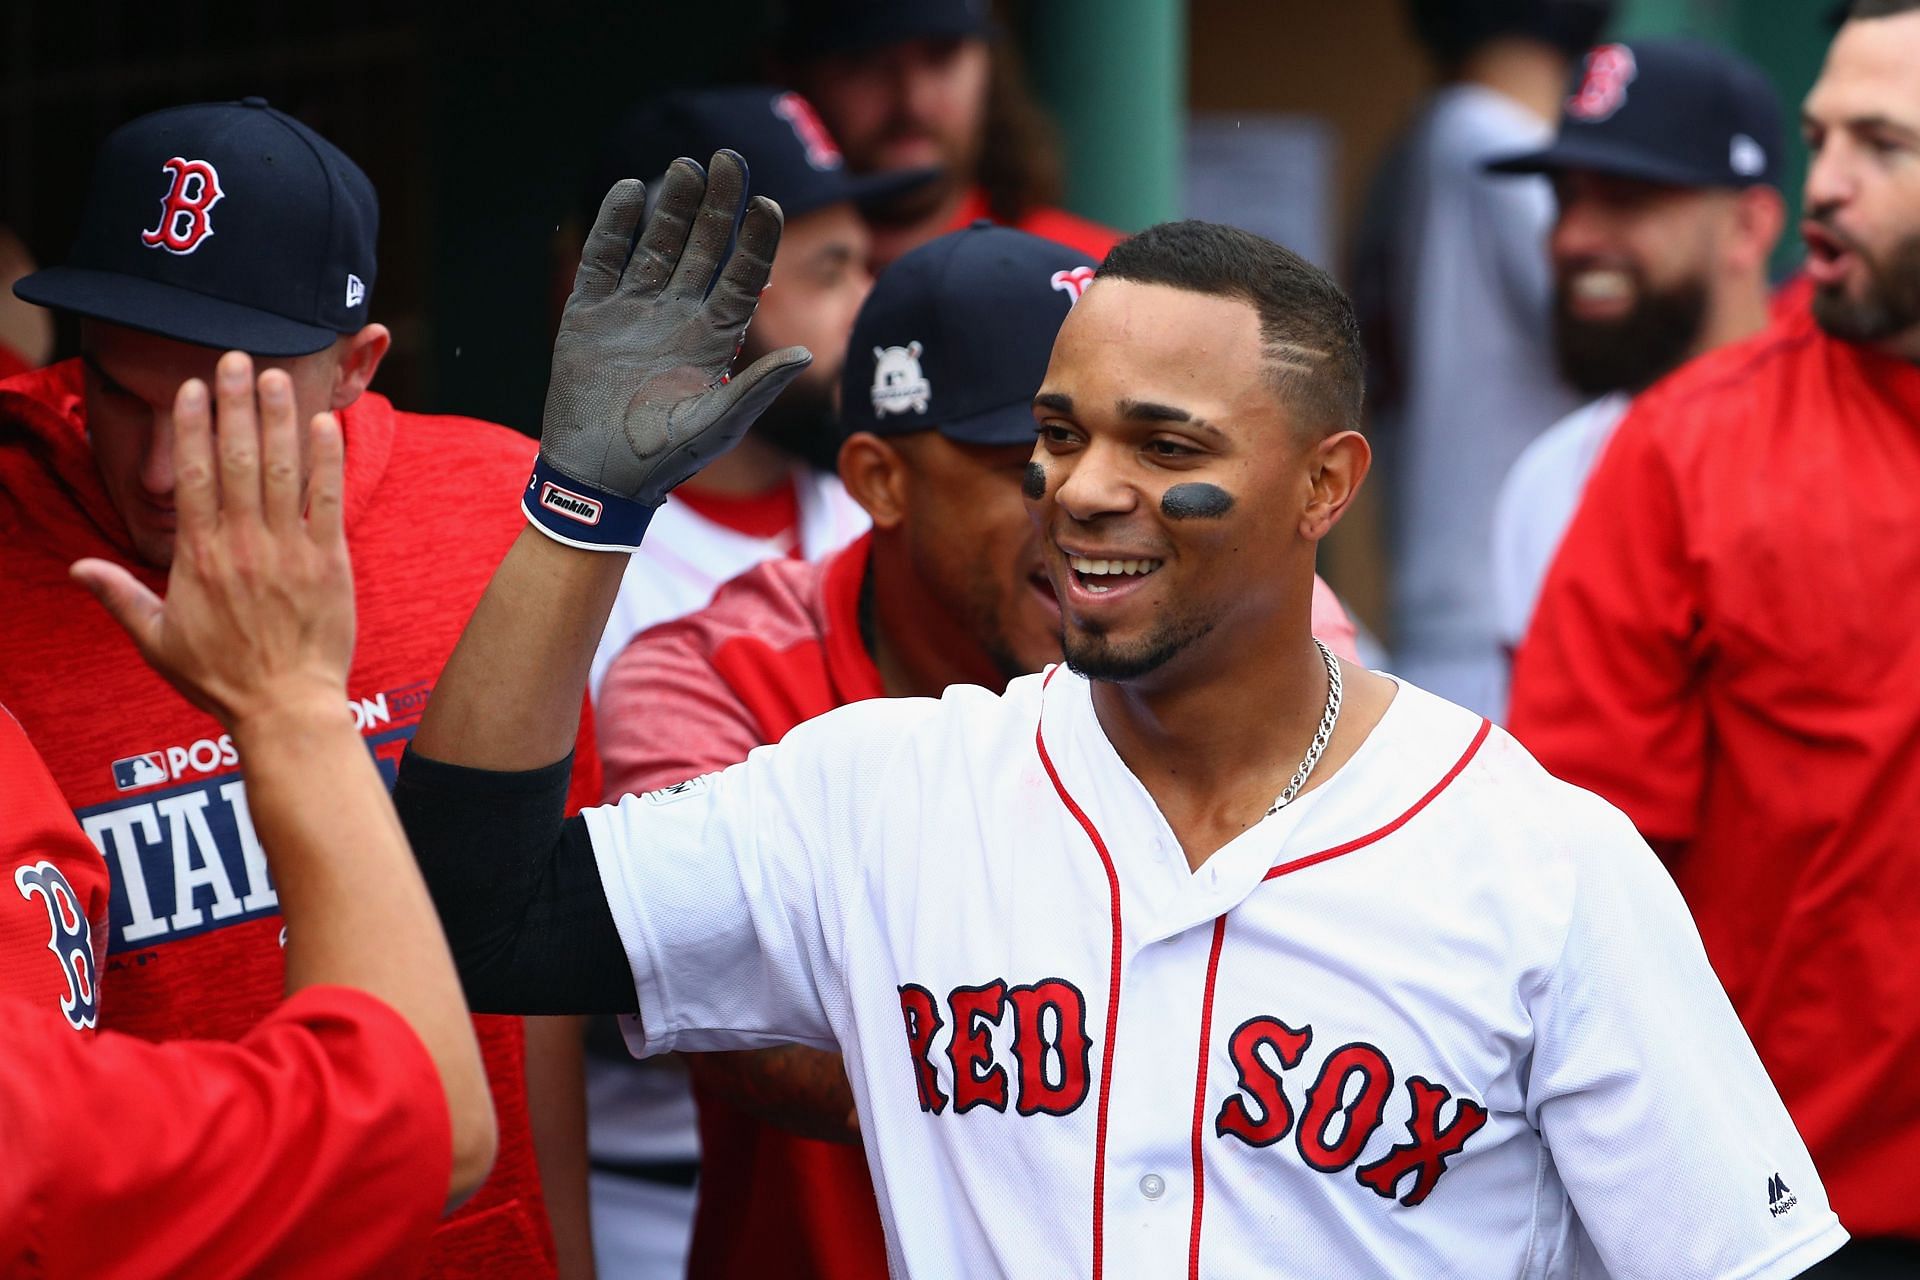 Xander Bogaerts played a key role in the signing of Trevor Story to Boston